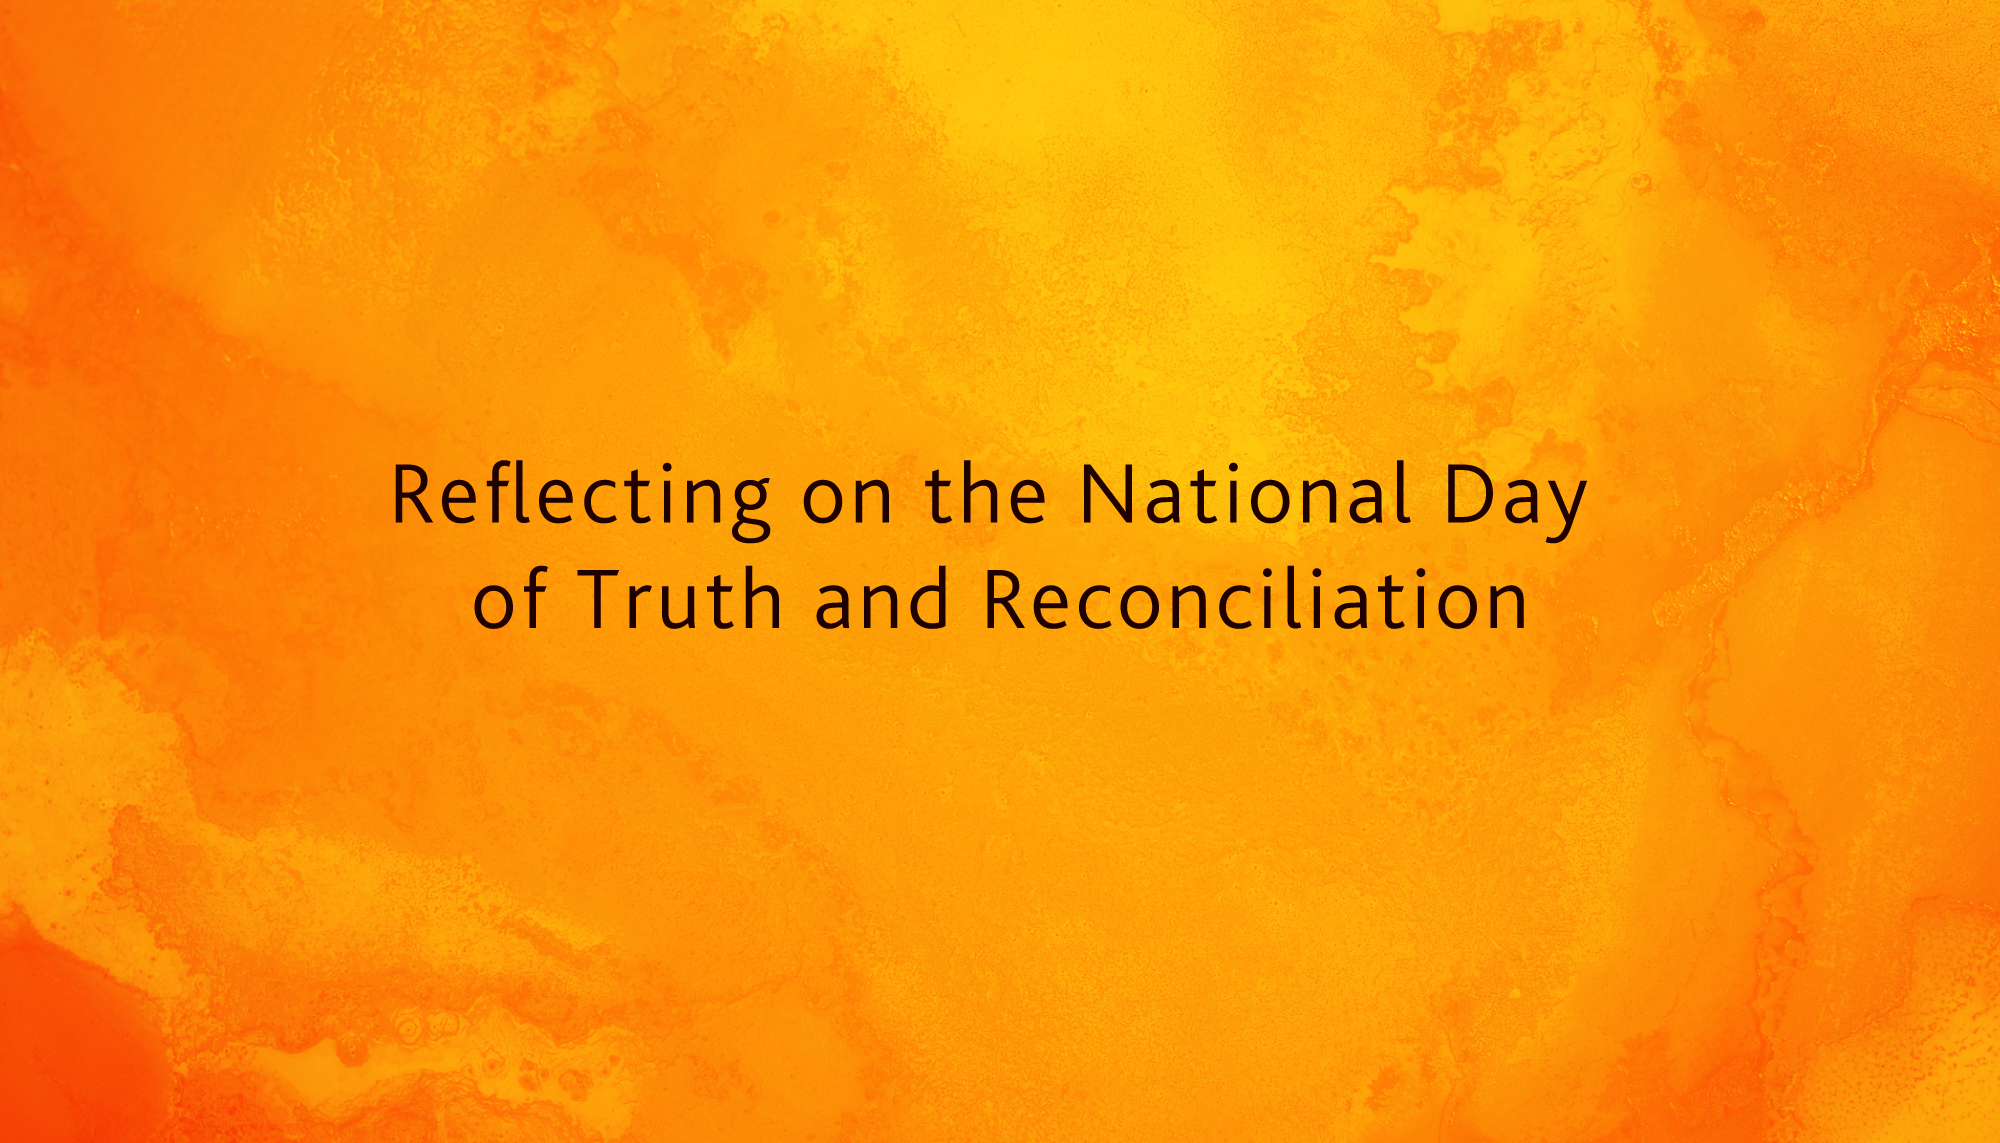 Reflecting on the National Day of Truth and Reconciliation